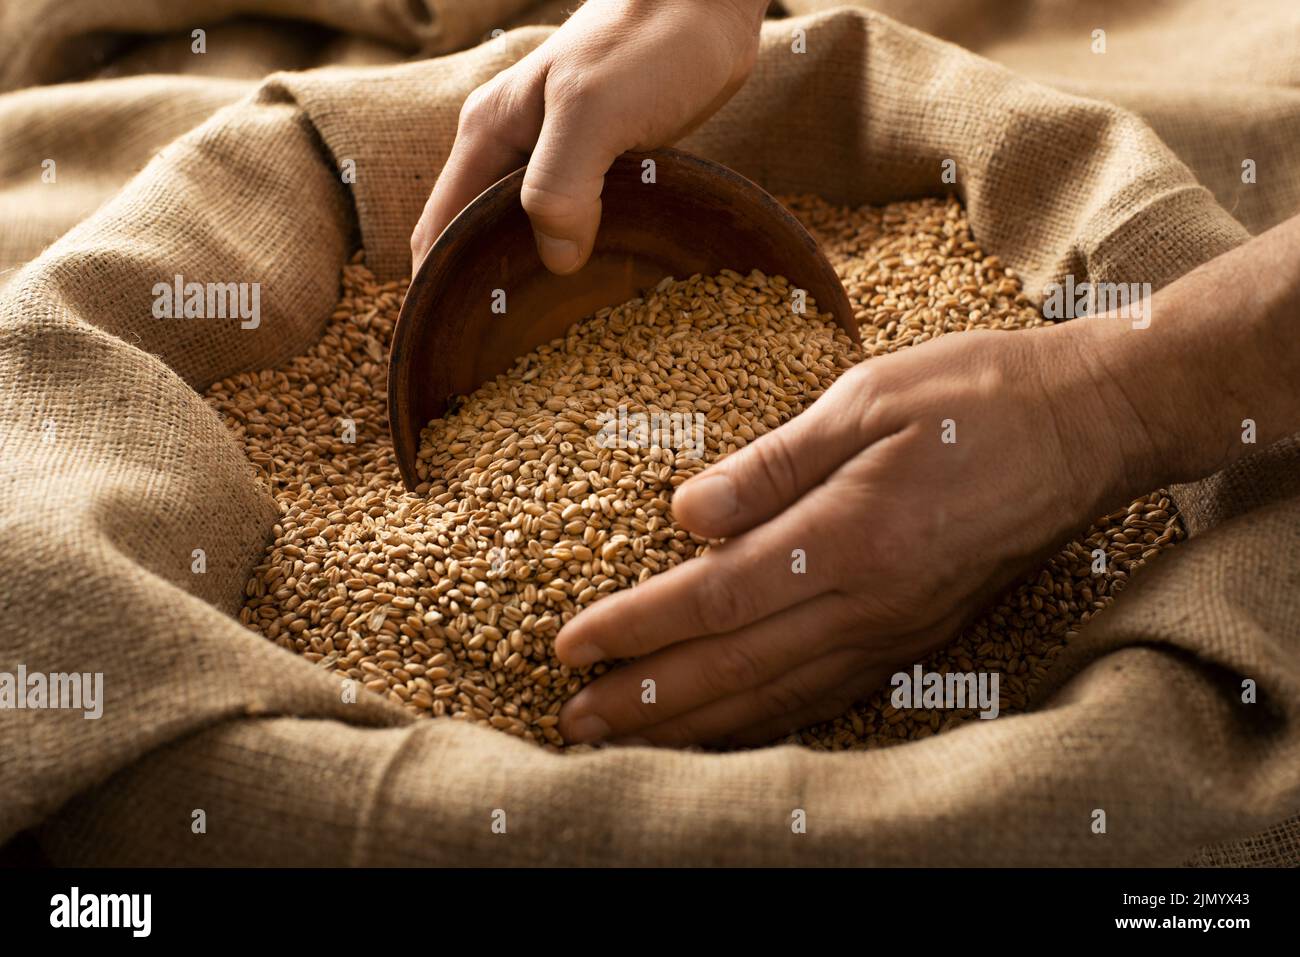 Caucasian male showing wheat grains in his hands over burlap sack Stock Photo